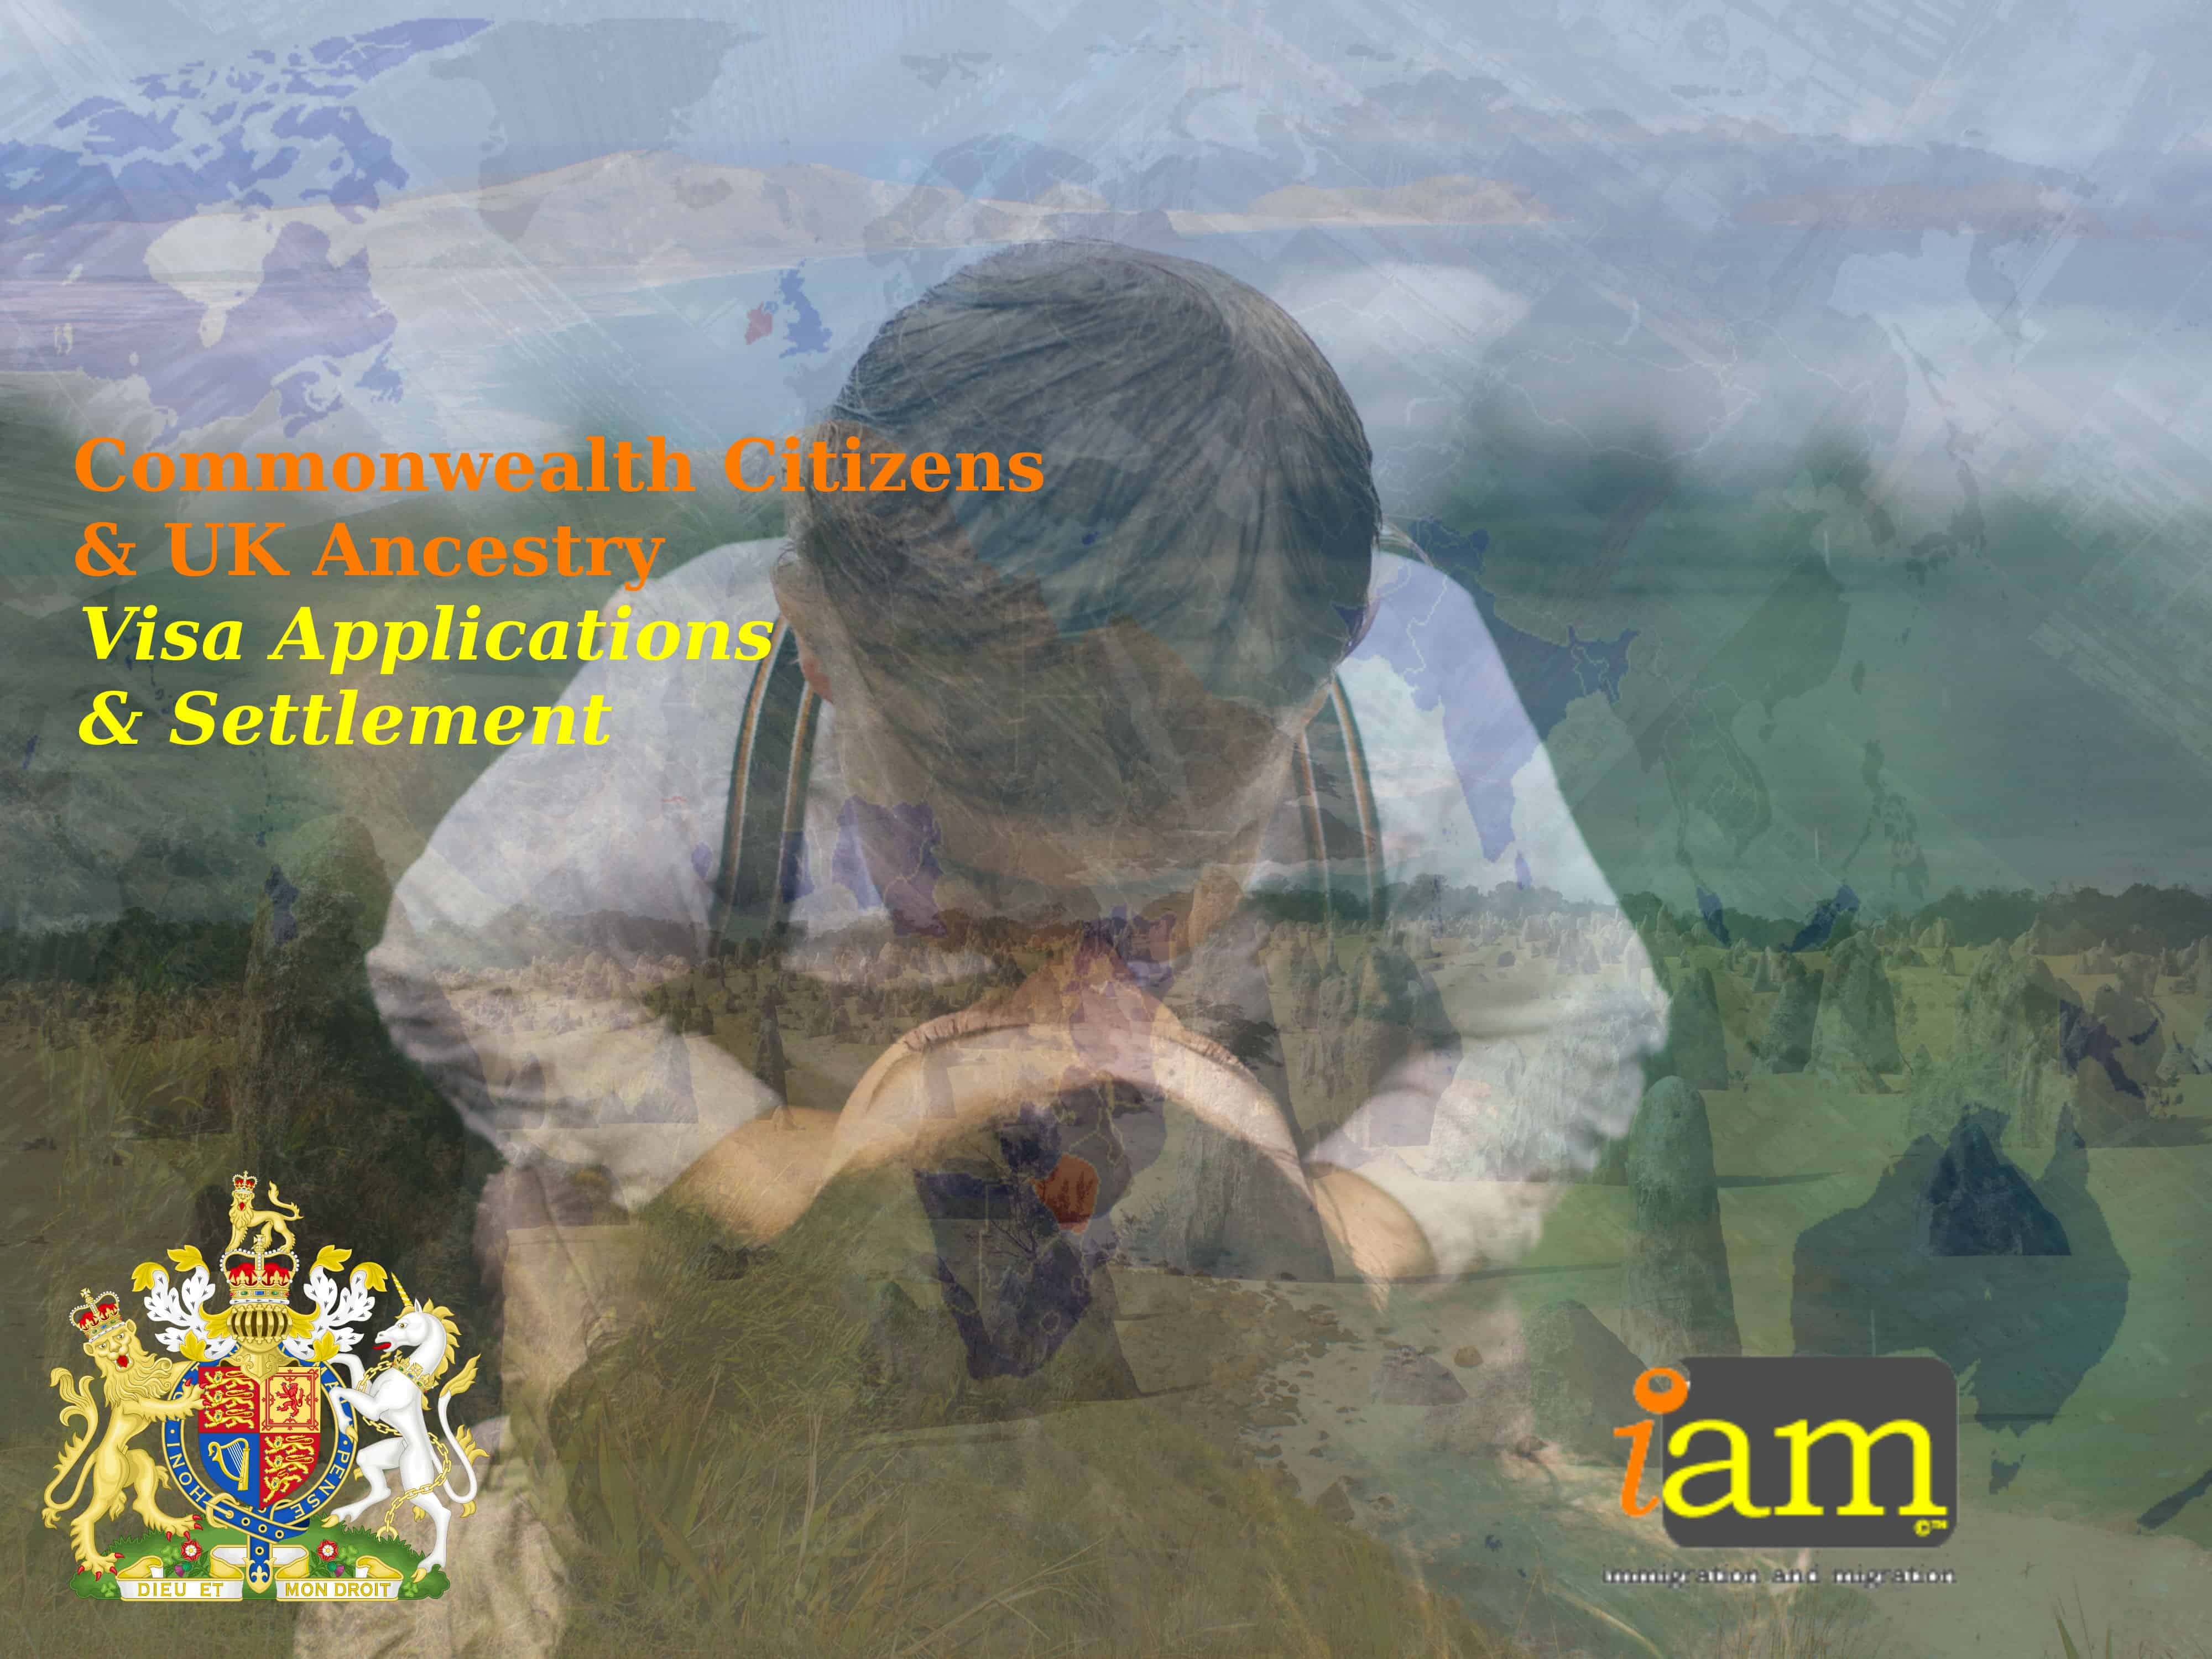 uk ancestry visa applications - ancestry and commonwealth visa UK applications with iam